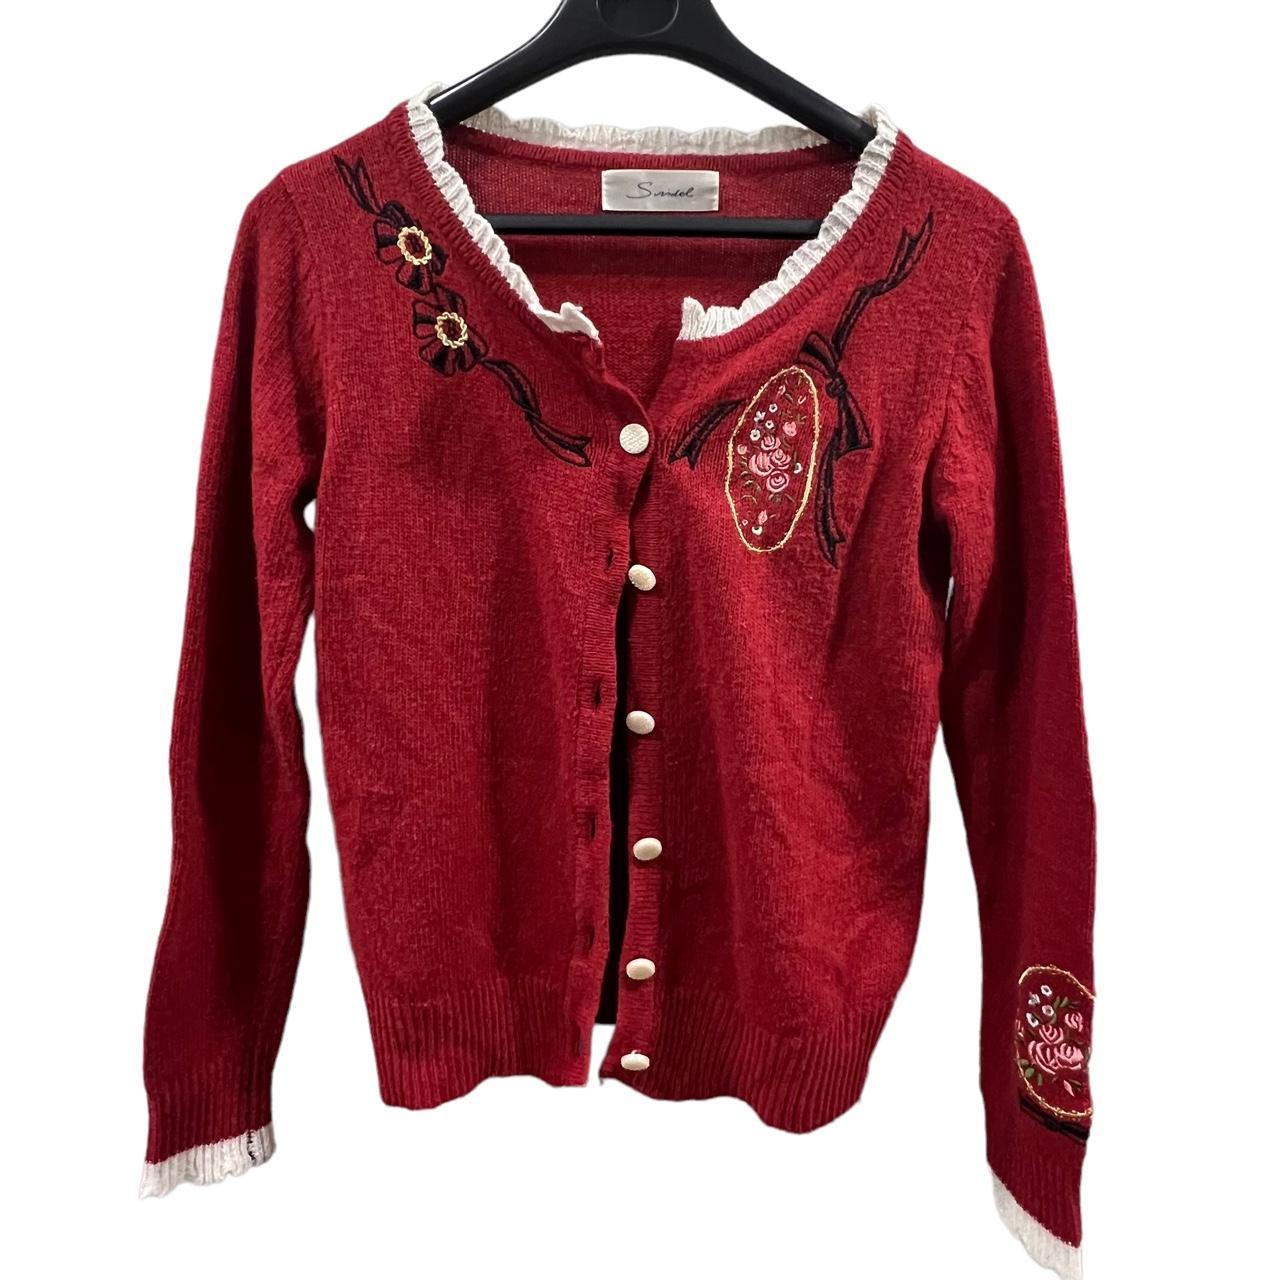 Product Image 1 - Vintage style red embroidered cardigan

Really